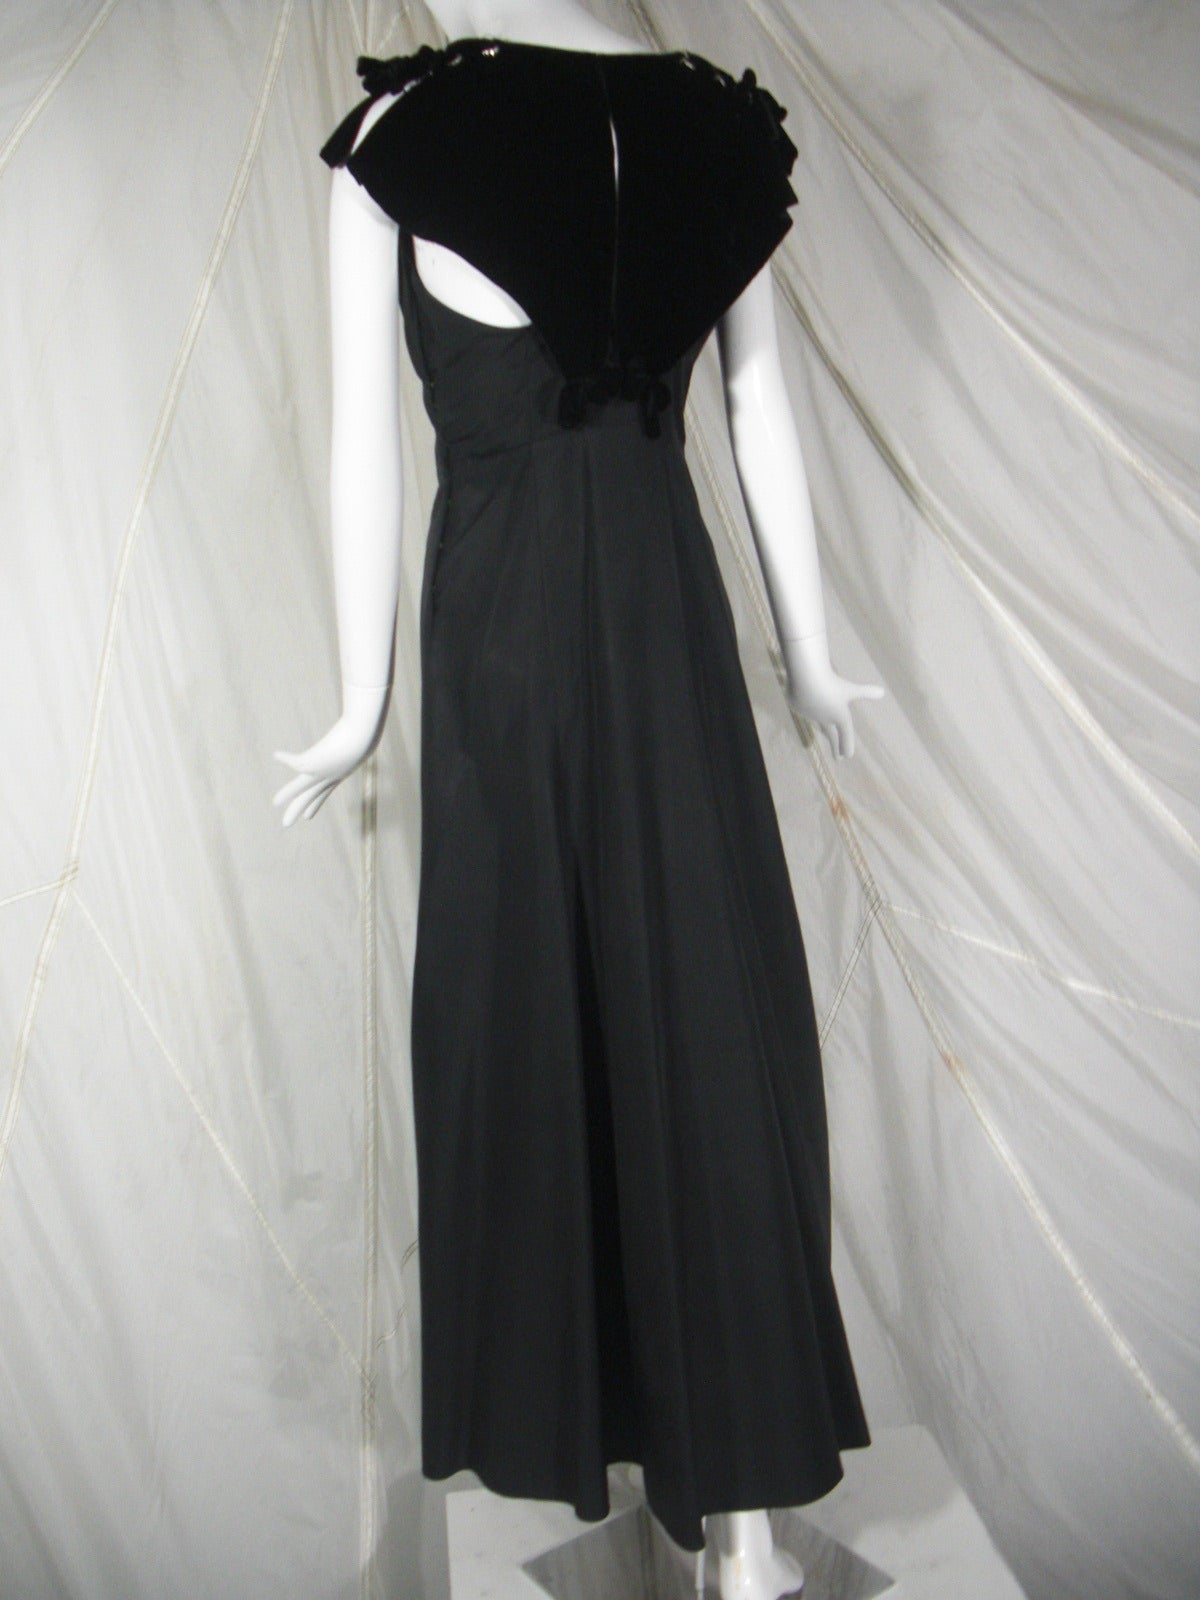 Women's 1930s Black Acetate and Velvet Lace Up Gown with Grommets